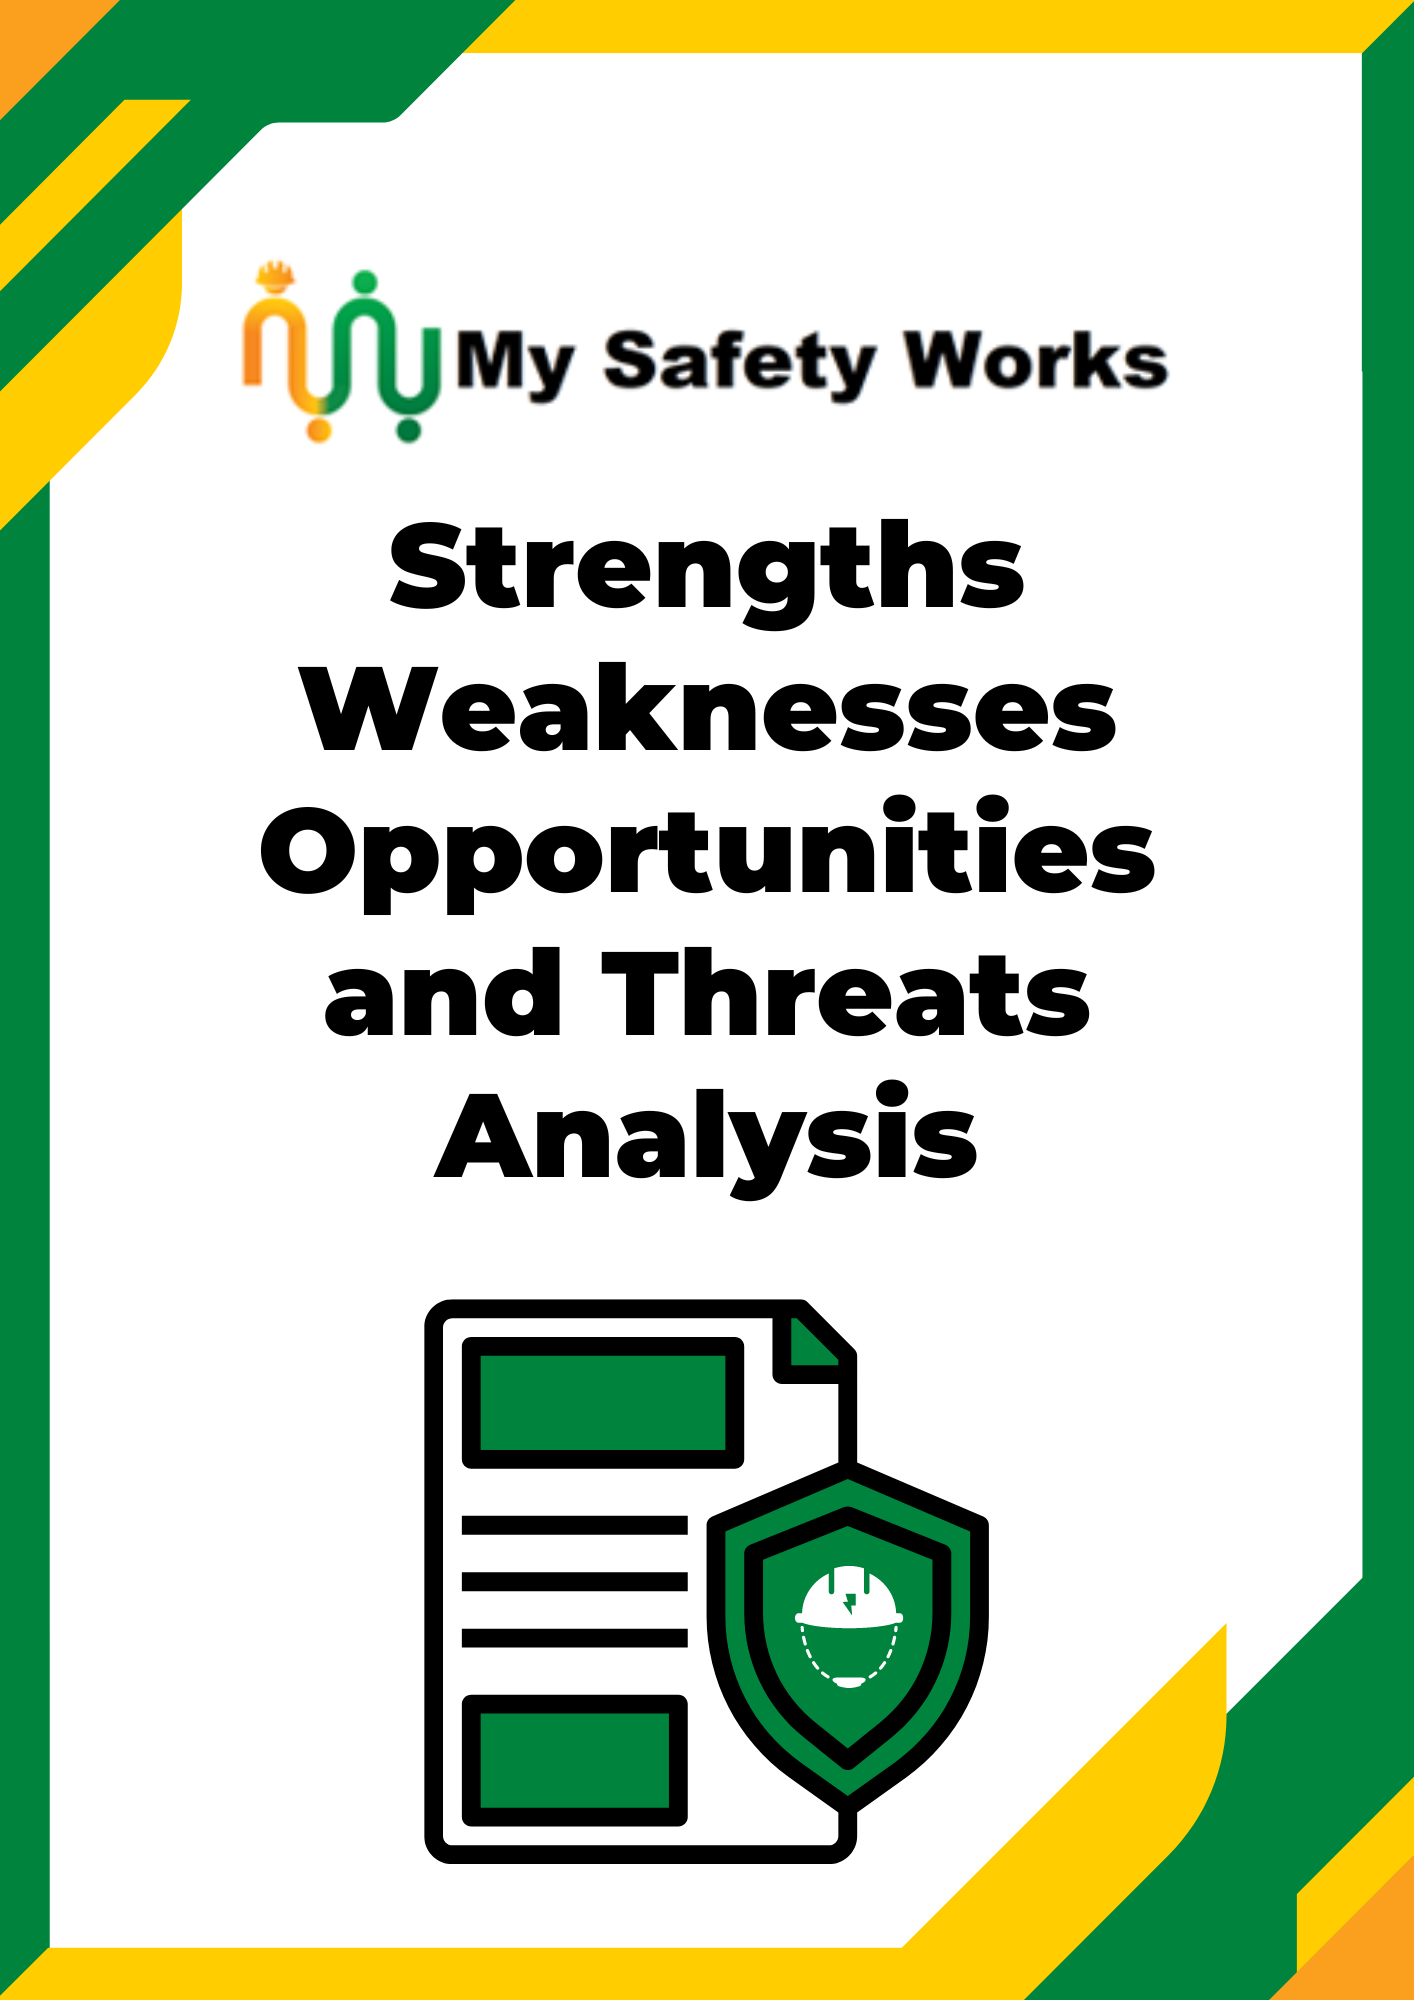 SWOT Analysis - Strengths weaknesses opportunities and threats